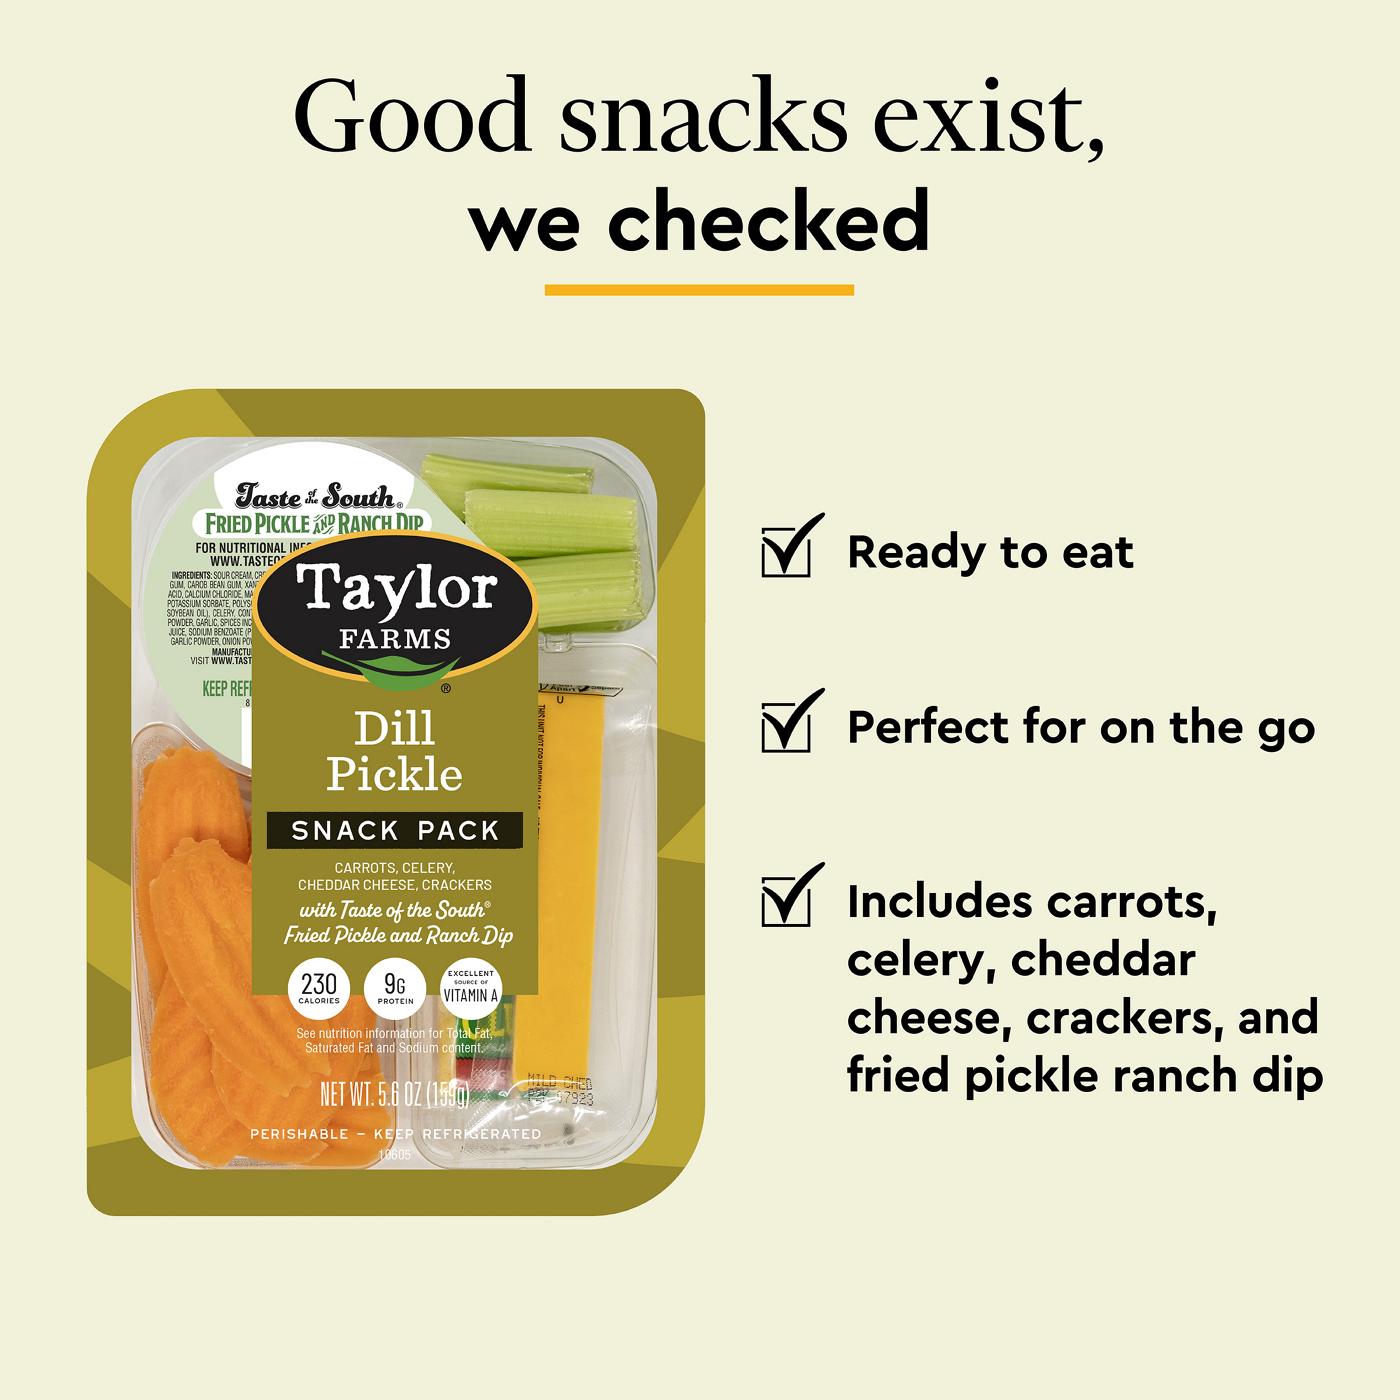 Taylor Farms Dill Pickle Snack Pack; image 2 of 4